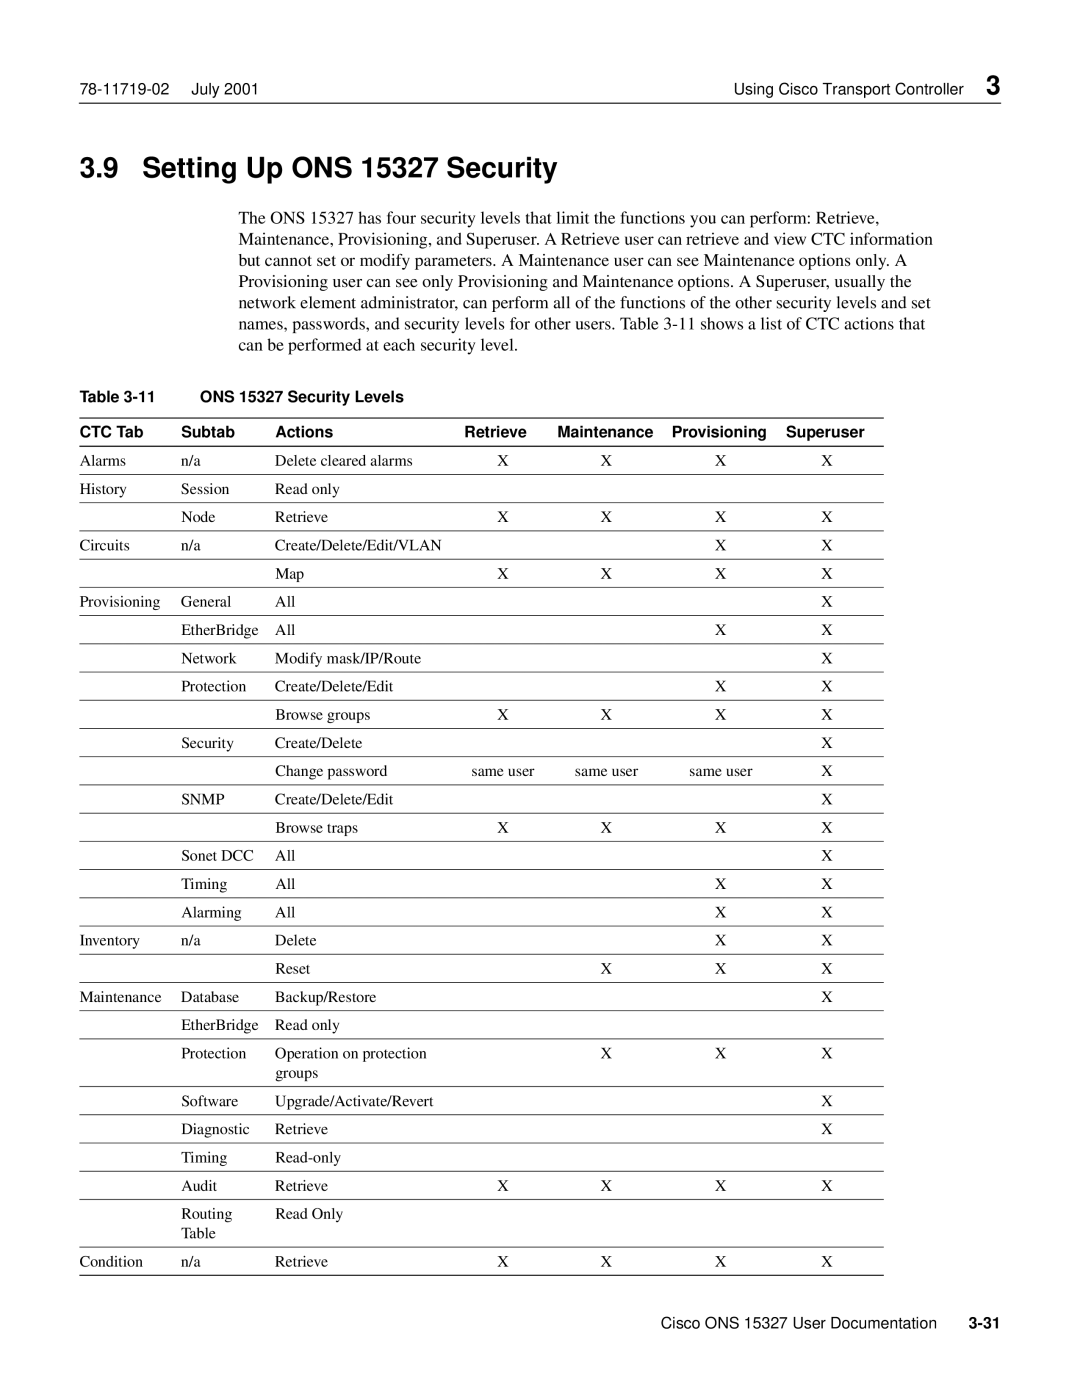 Cisco Systems Setting Up ONS 15327 Security, ONS 15327 Security Levels, CTC Tab, Subtab, Actions, Retrieve, Maintenance 